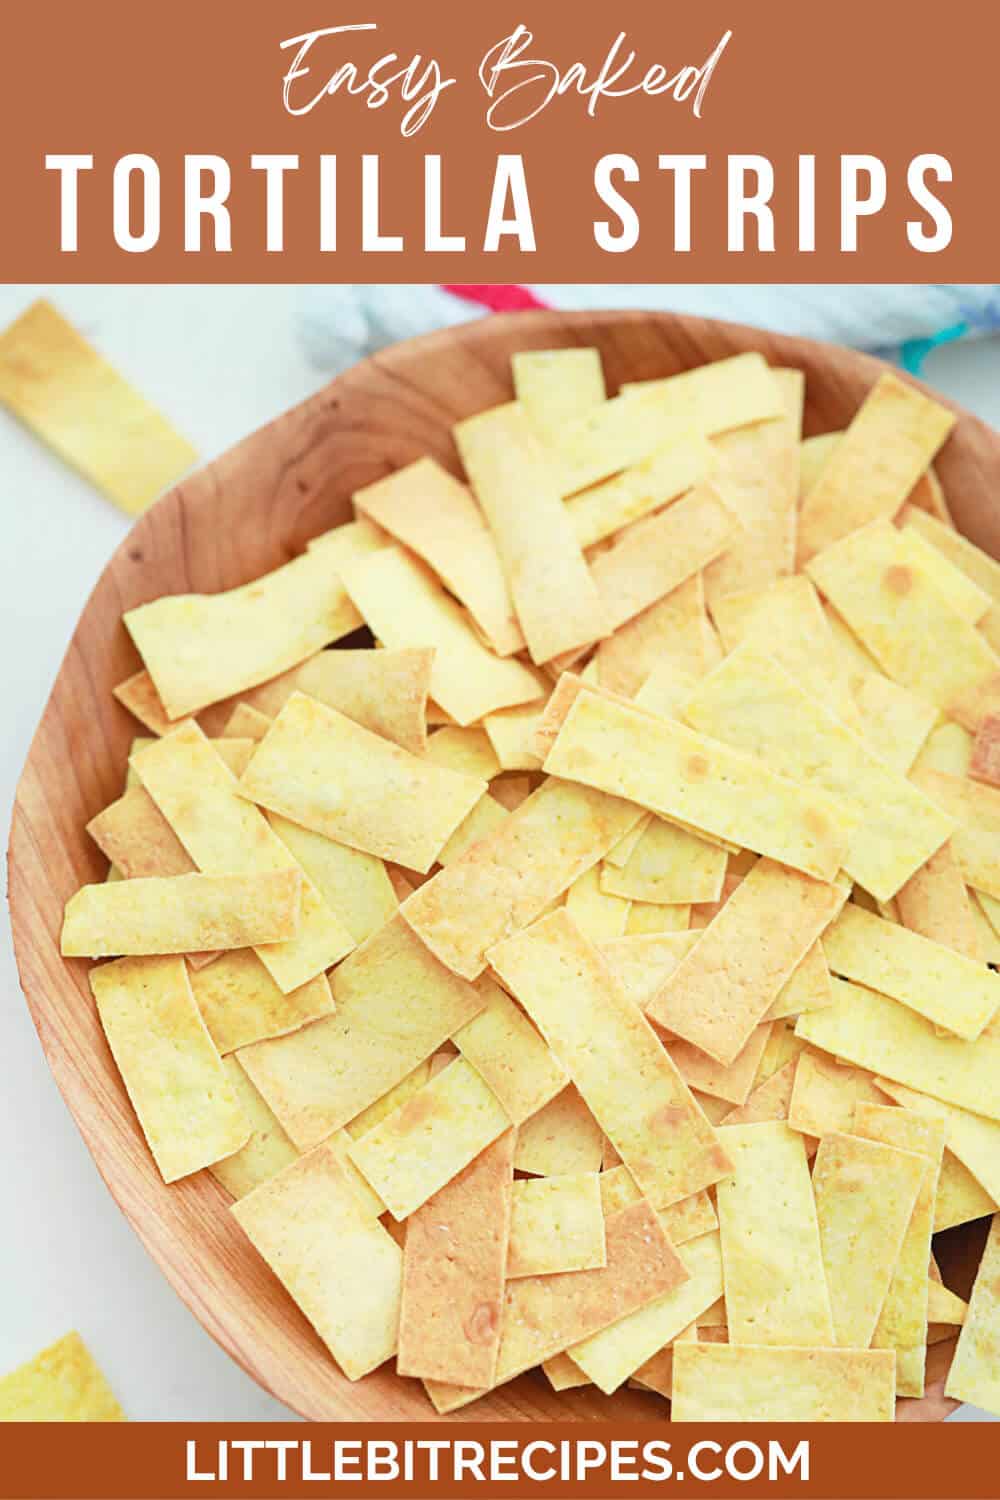 baked tortilla strips with text.